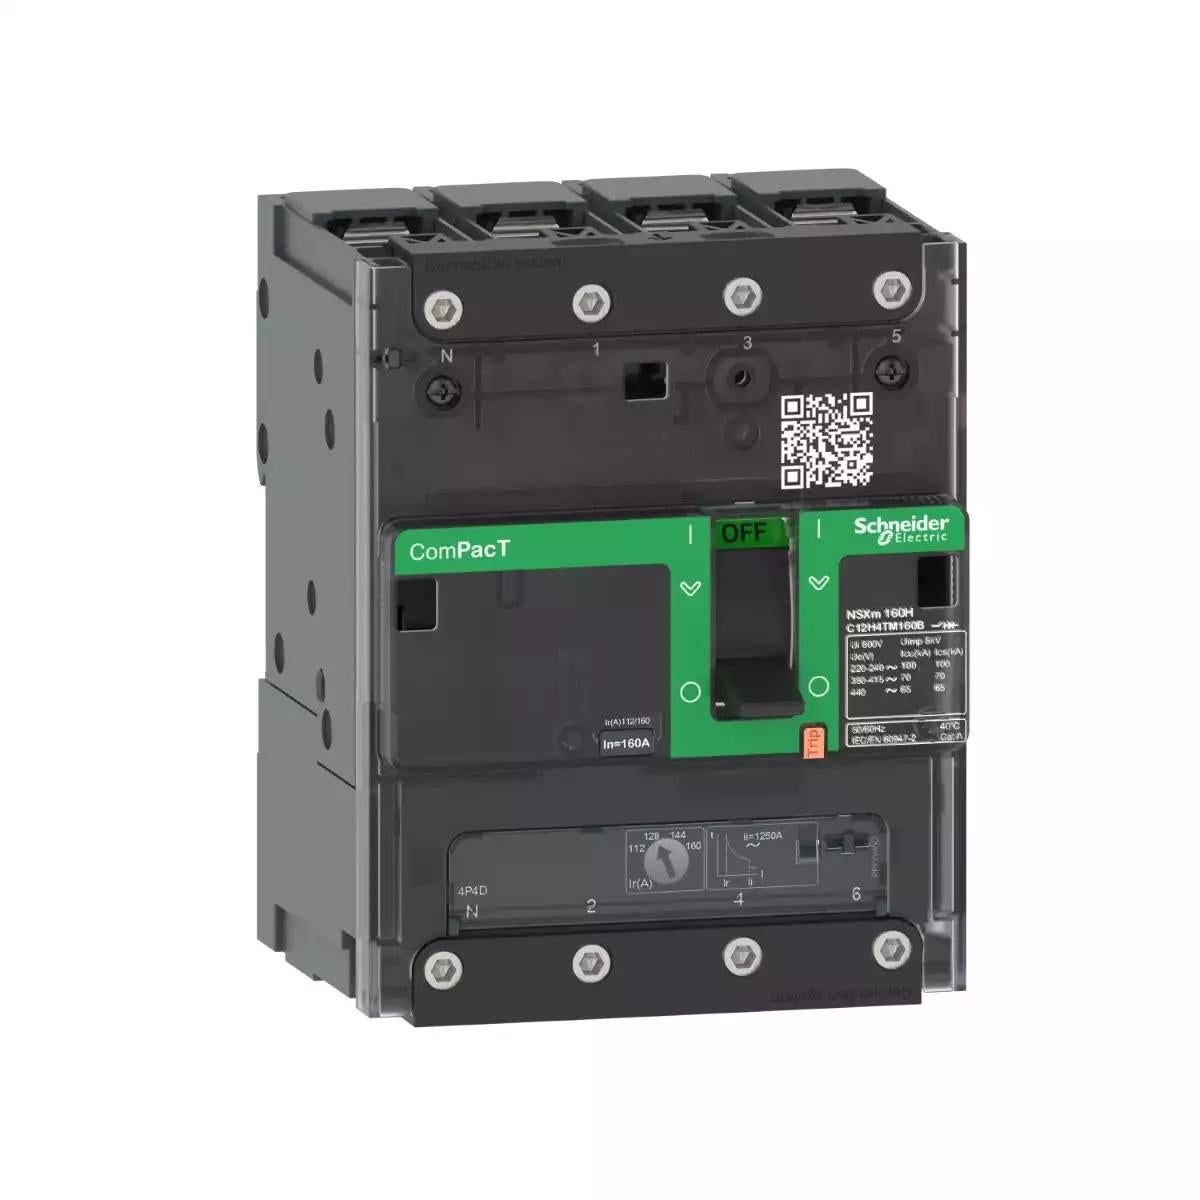 Schneider Electric Circuit breaker ComPacT NSXm N (50kA at 415VAC), 4 Poles 3d, 63A rating TMD trip unit, compression lugs and busbar connectors